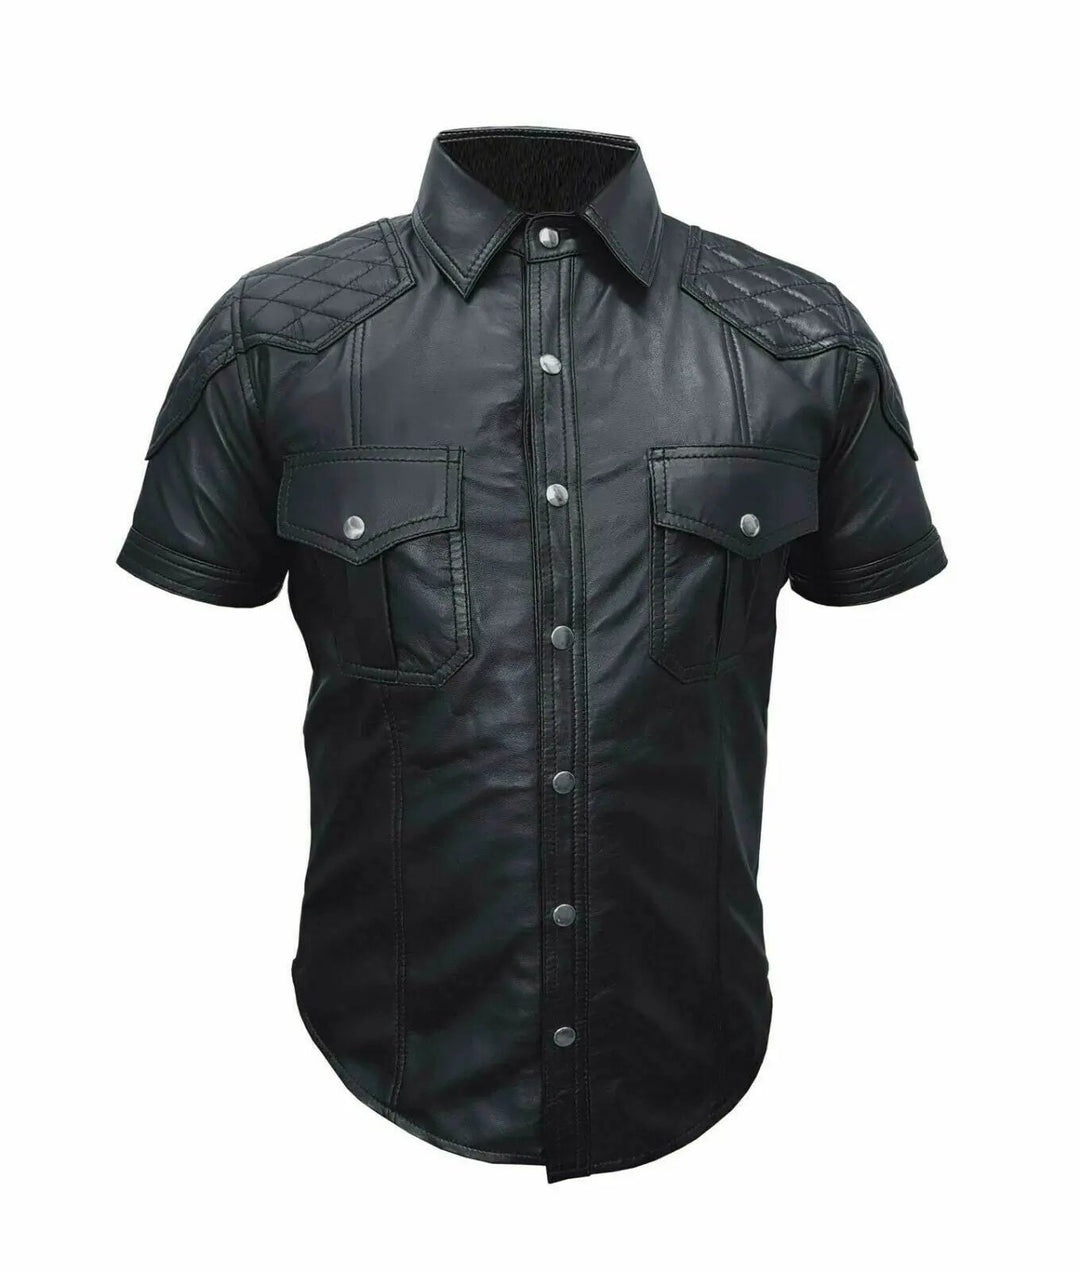 Men's Real Black Leather Police Uniform Style Shirt All For Me Today